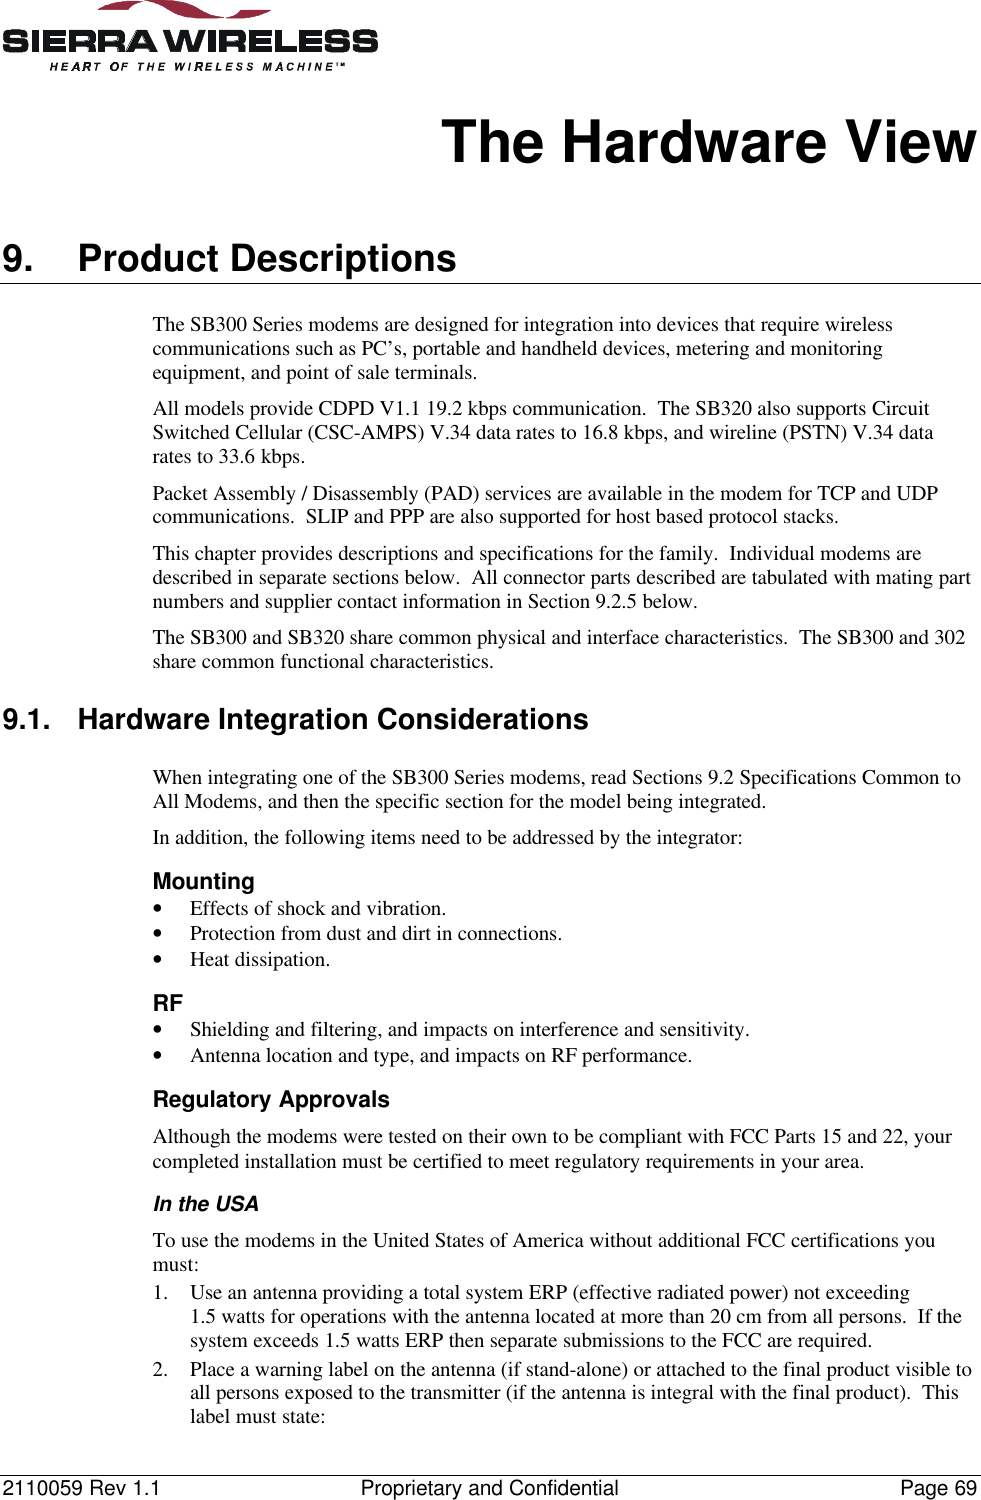 2110059 Rev 1.1 Proprietary and Confidential Page 69The Hardware View9. Product DescriptionsThe SB300 Series modems are designed for integration into devices that require wirelesscommunications such as PC’s, portable and handheld devices, metering and monitoringequipment, and point of sale terminals.All models provide CDPD V1.1 19.2 kbps communication.  The SB320 also supports CircuitSwitched Cellular (CSC-AMPS) V.34 data rates to 16.8 kbps, and wireline (PSTN) V.34 datarates to 33.6 kbps.Packet Assembly / Disassembly (PAD) services are available in the modem for TCP and UDPcommunications.  SLIP and PPP are also supported for host based protocol stacks.This chapter provides descriptions and specifications for the family.  Individual modems aredescribed in separate sections below.  All connector parts described are tabulated with mating partnumbers and supplier contact information in Section 9.2.5 below.The SB300 and SB320 share common physical and interface characteristics.  The SB300 and 302share common functional characteristics.9.1. Hardware Integration ConsiderationsWhen integrating one of the SB300 Series modems, read Sections 9.2 Specifications Common toAll Modems, and then the specific section for the model being integrated.In addition, the following items need to be addressed by the integrator:Mounting• Effects of shock and vibration.• Protection from dust and dirt in connections.• Heat dissipation.RF• Shielding and filtering, and impacts on interference and sensitivity.• Antenna location and type, and impacts on RF performance.Regulatory ApprovalsAlthough the modems were tested on their own to be compliant with FCC Parts 15 and 22, yourcompleted installation must be certified to meet regulatory requirements in your area.In the USATo use the modems in the United States of America without additional FCC certifications youmust:1. Use an antenna providing a total system ERP (effective radiated power) not exceeding1.5 watts for operations with the antenna located at more than 20 cm from all persons.  If thesystem exceeds 1.5 watts ERP then separate submissions to the FCC are required.2. Place a warning label on the antenna (if stand-alone) or attached to the final product visible toall persons exposed to the transmitter (if the antenna is integral with the final product).  Thislabel must state: